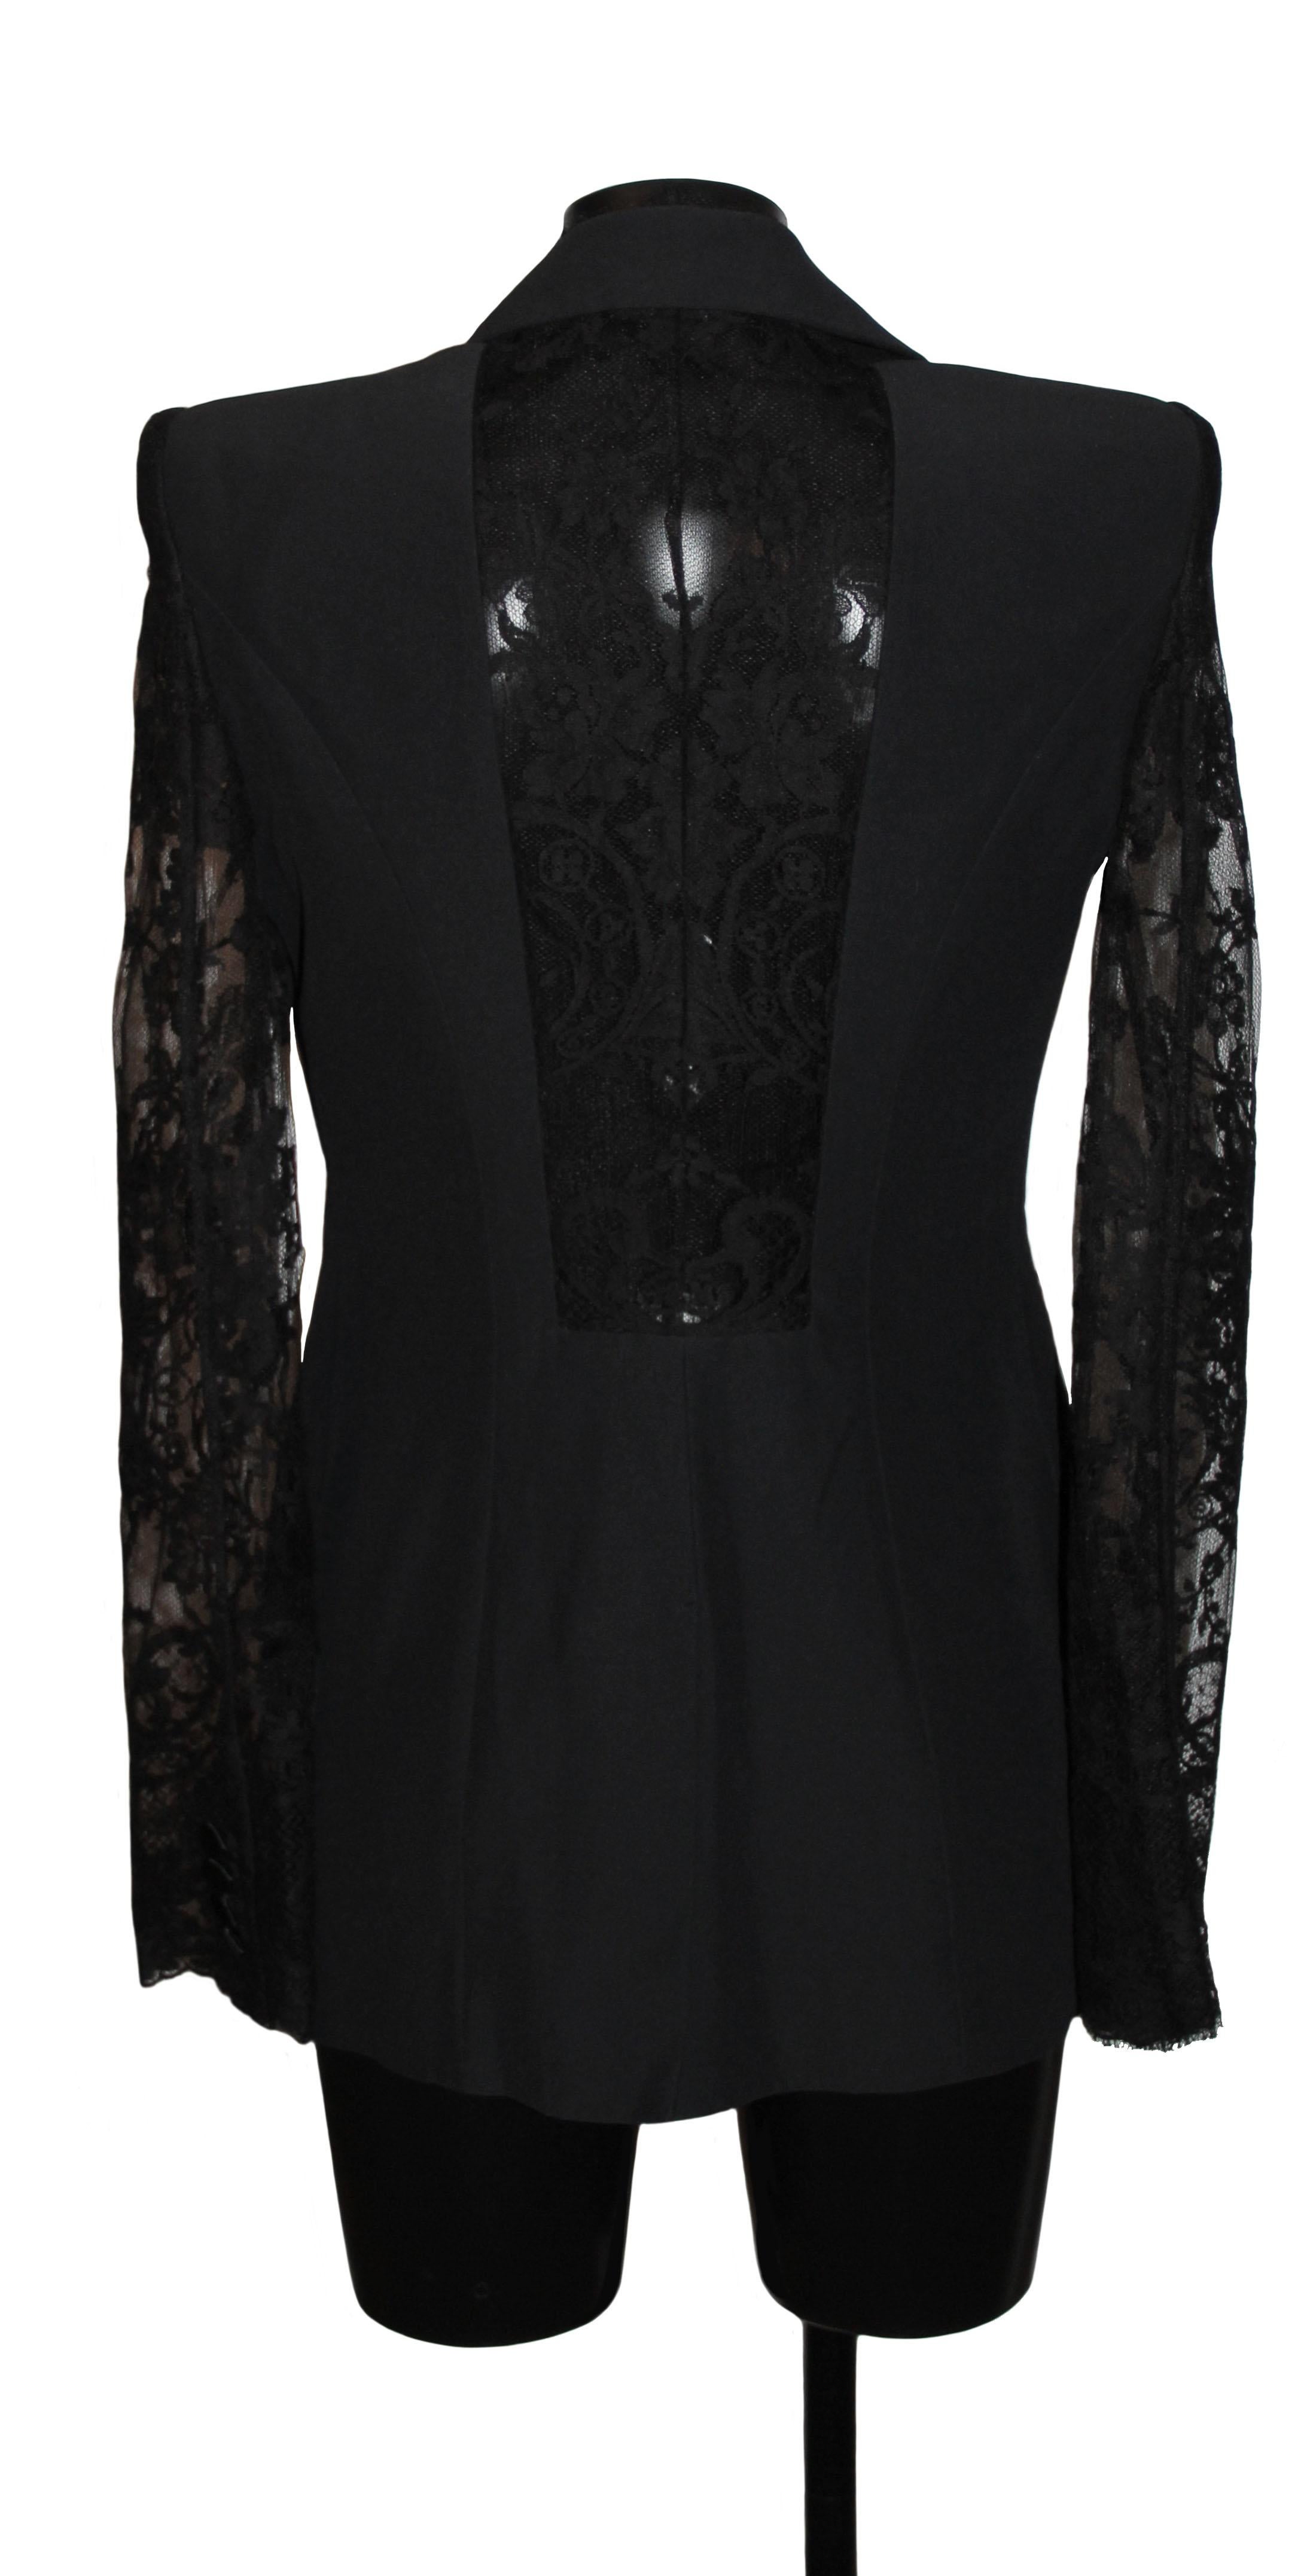 This pre-owned in pristine condition black crepe tuxedo jacket represents the talent of Alexander McQueen.
The mix of delicate lace and plain fabric is designed to accentuate the feminity of a tuxedo jacket.

It features lace sleeves and lace back